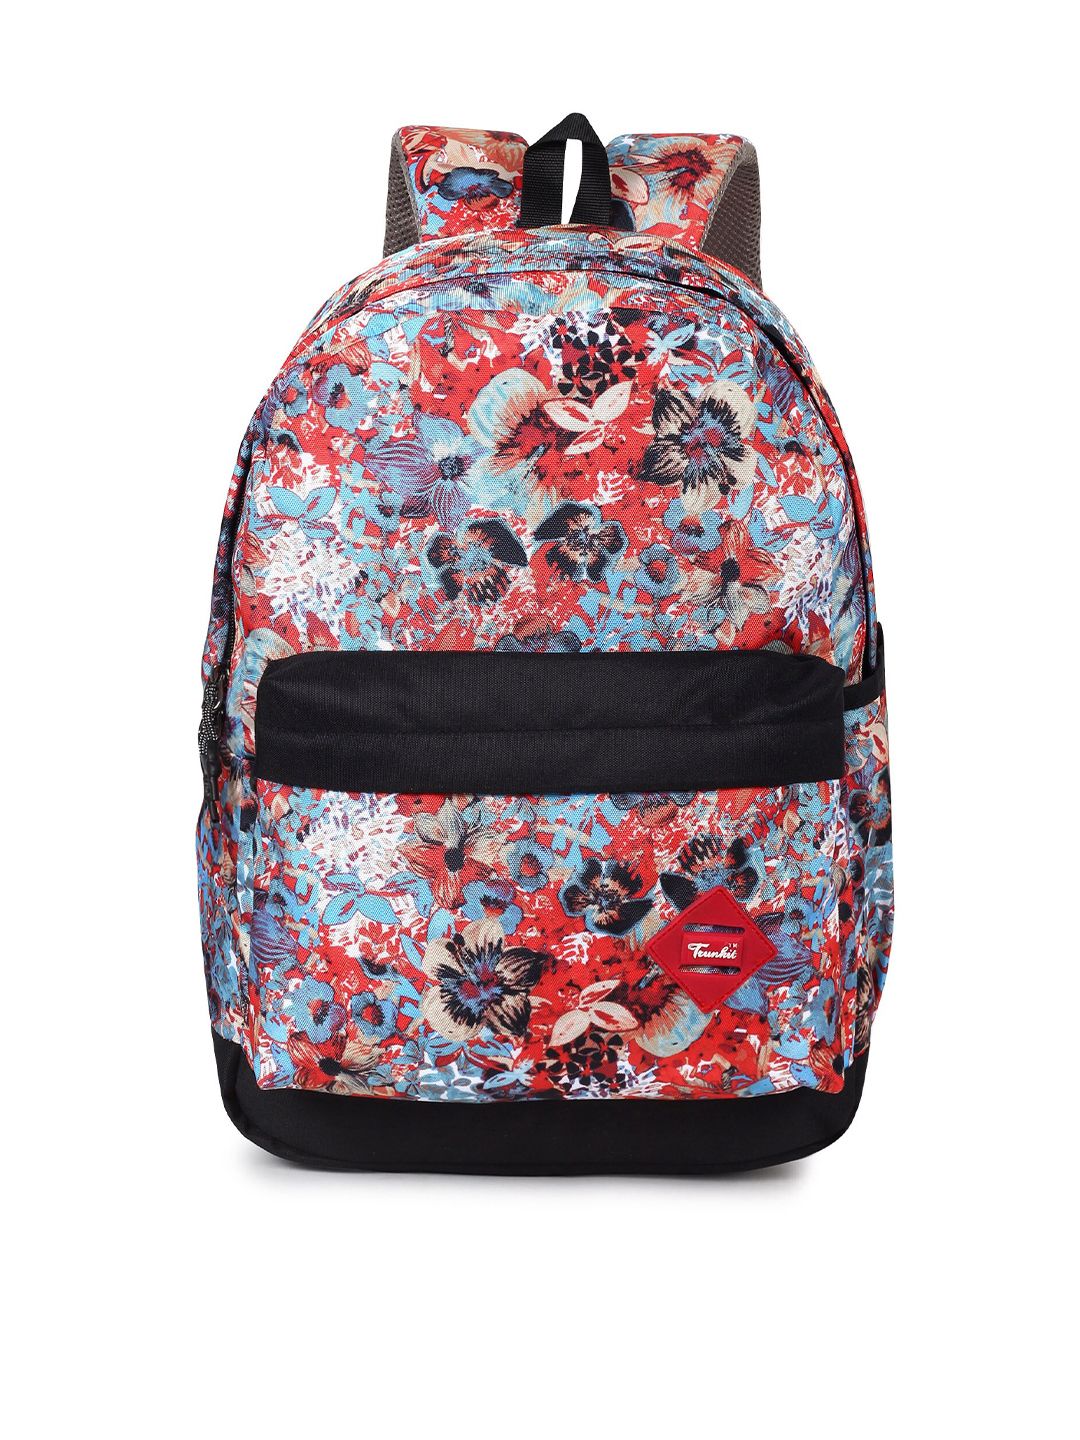 TRUNKIT Unisex Blue & Red Graphic Backpack Price in India